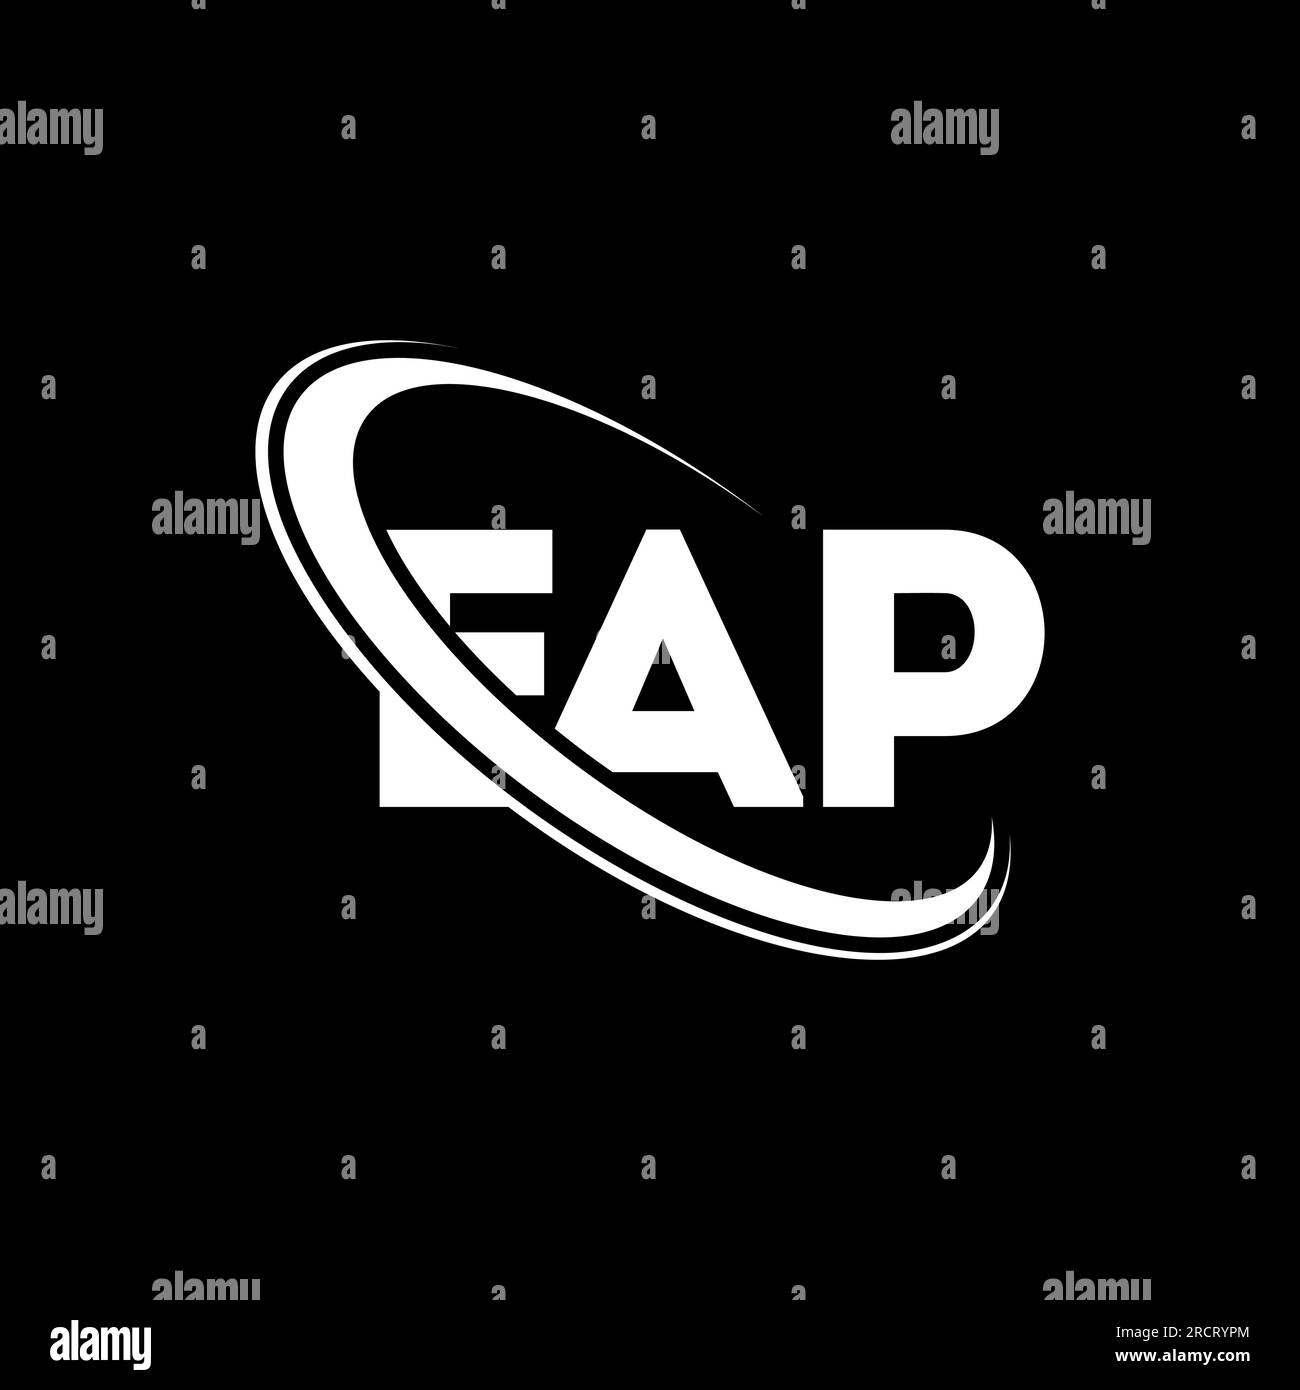 EAP logo. EAP letter. EAP letter logo design. Initials EAP logo linked with circle and uppercase monogram logo. EAP typography for technology, busines Stock Vector